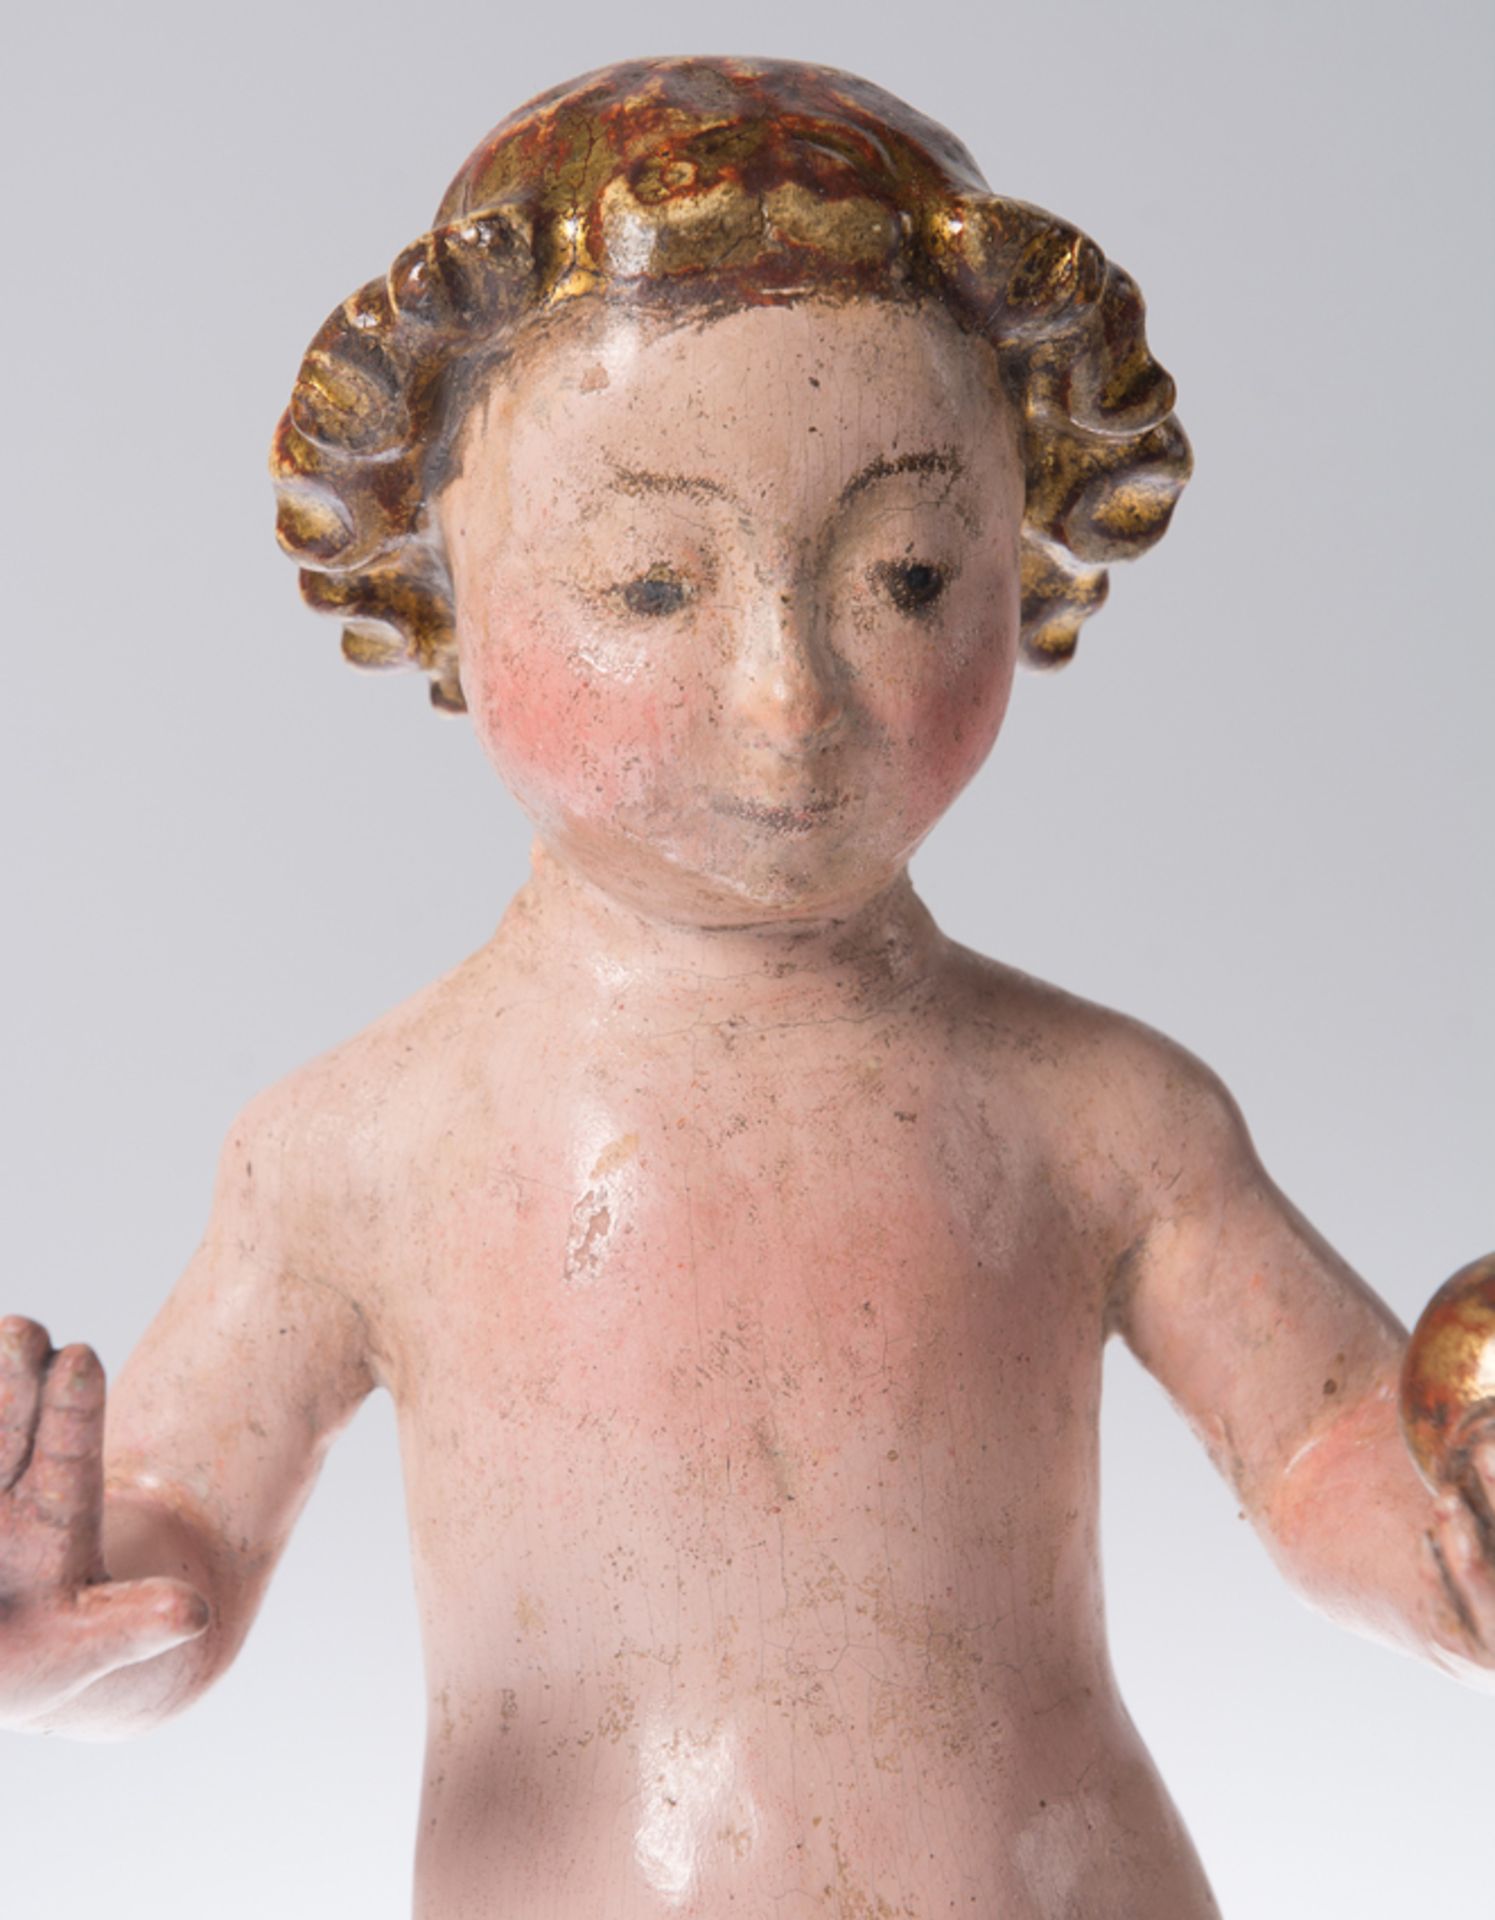 "Christ Child". Carved, polychromed and gilded wooden sculpture. Flemish School. Mechelen. 16th cent - Image 4 of 8